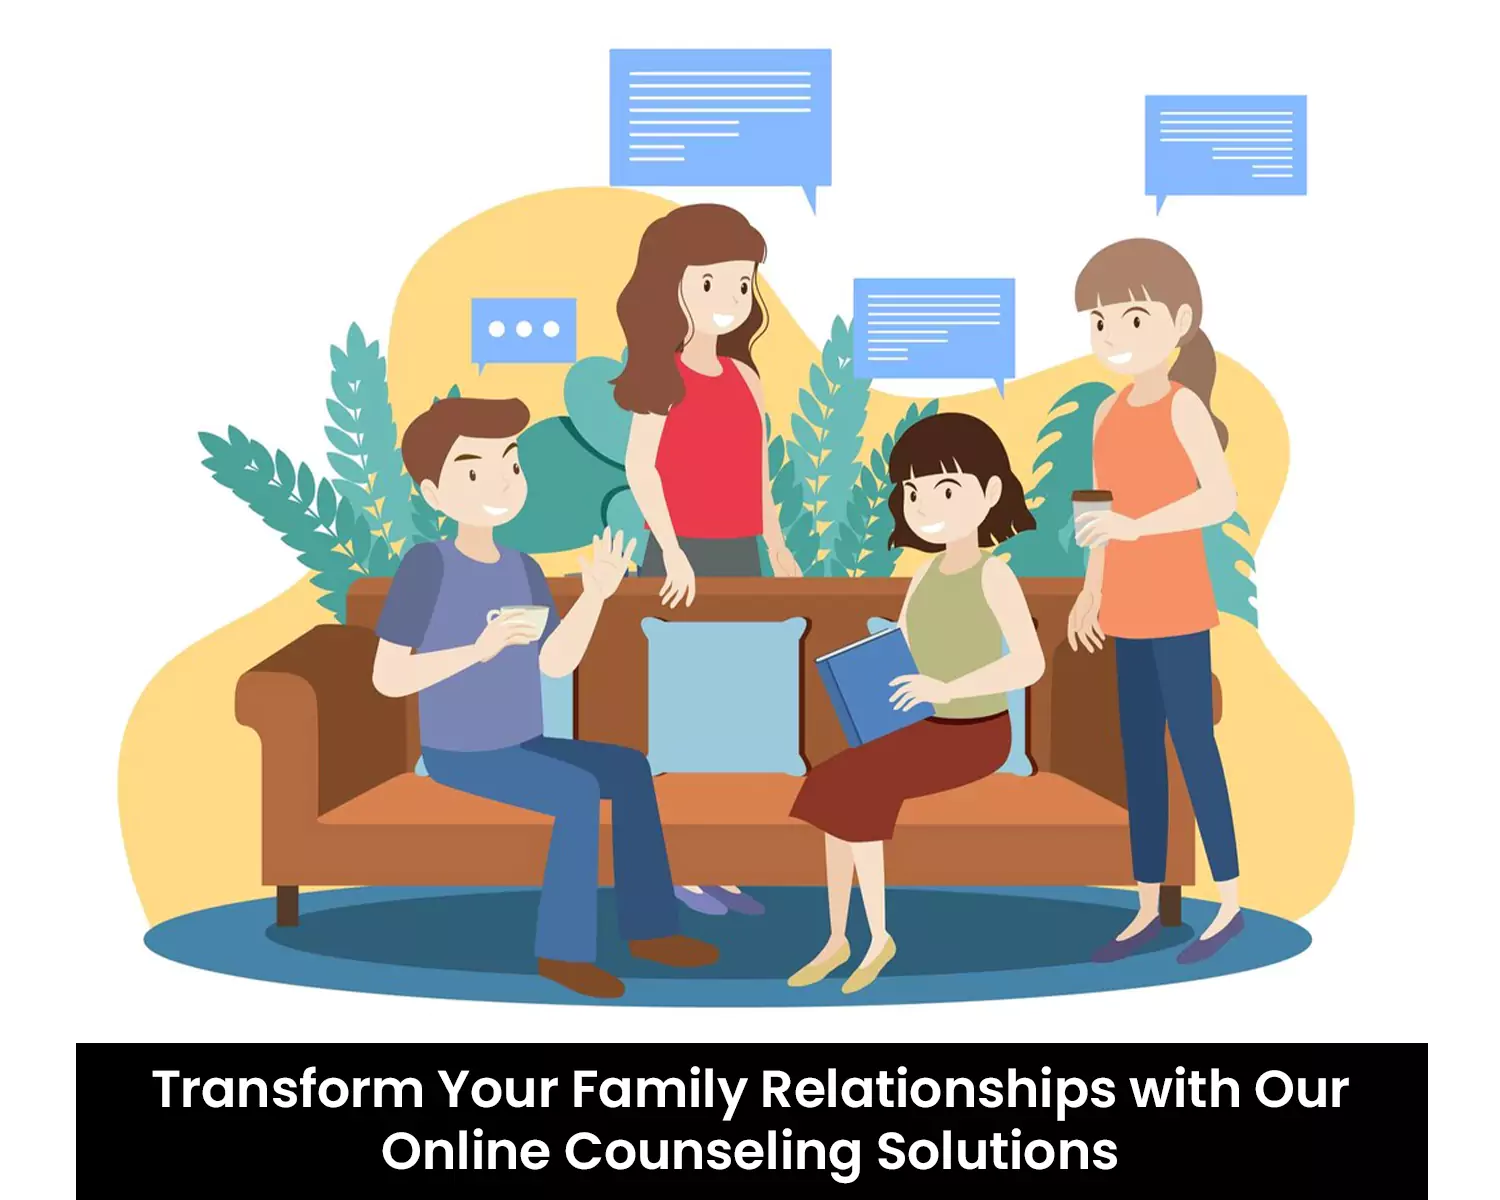 Transform Your Family Relationships with Our Online Counseling Solutions